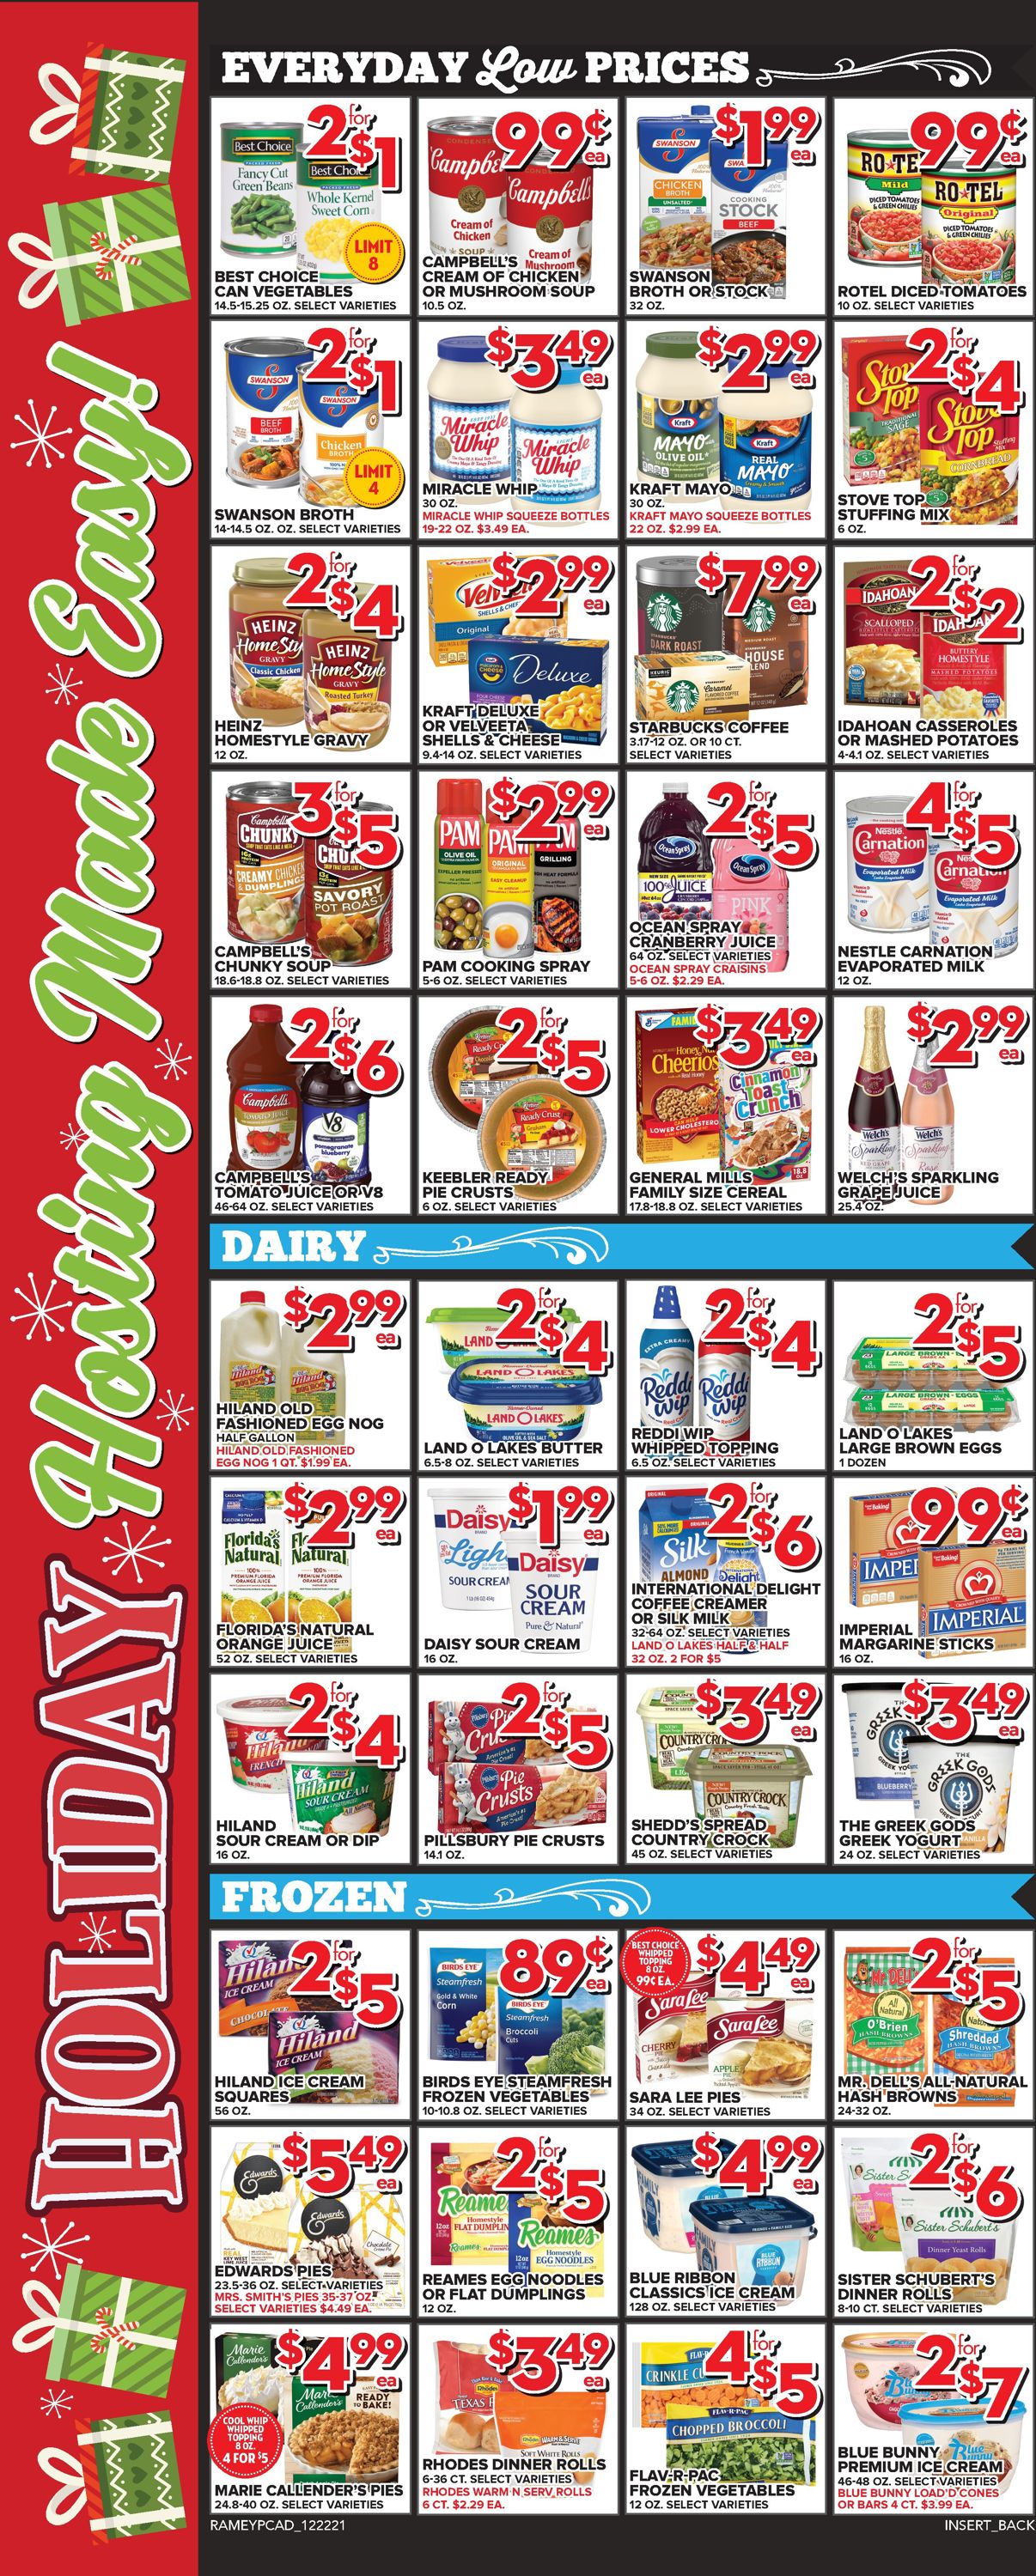 Price Cutter CHRISTMAS 2021 Weekly Ad Circular - valid 12/22-12/28/2021 (Page 6)